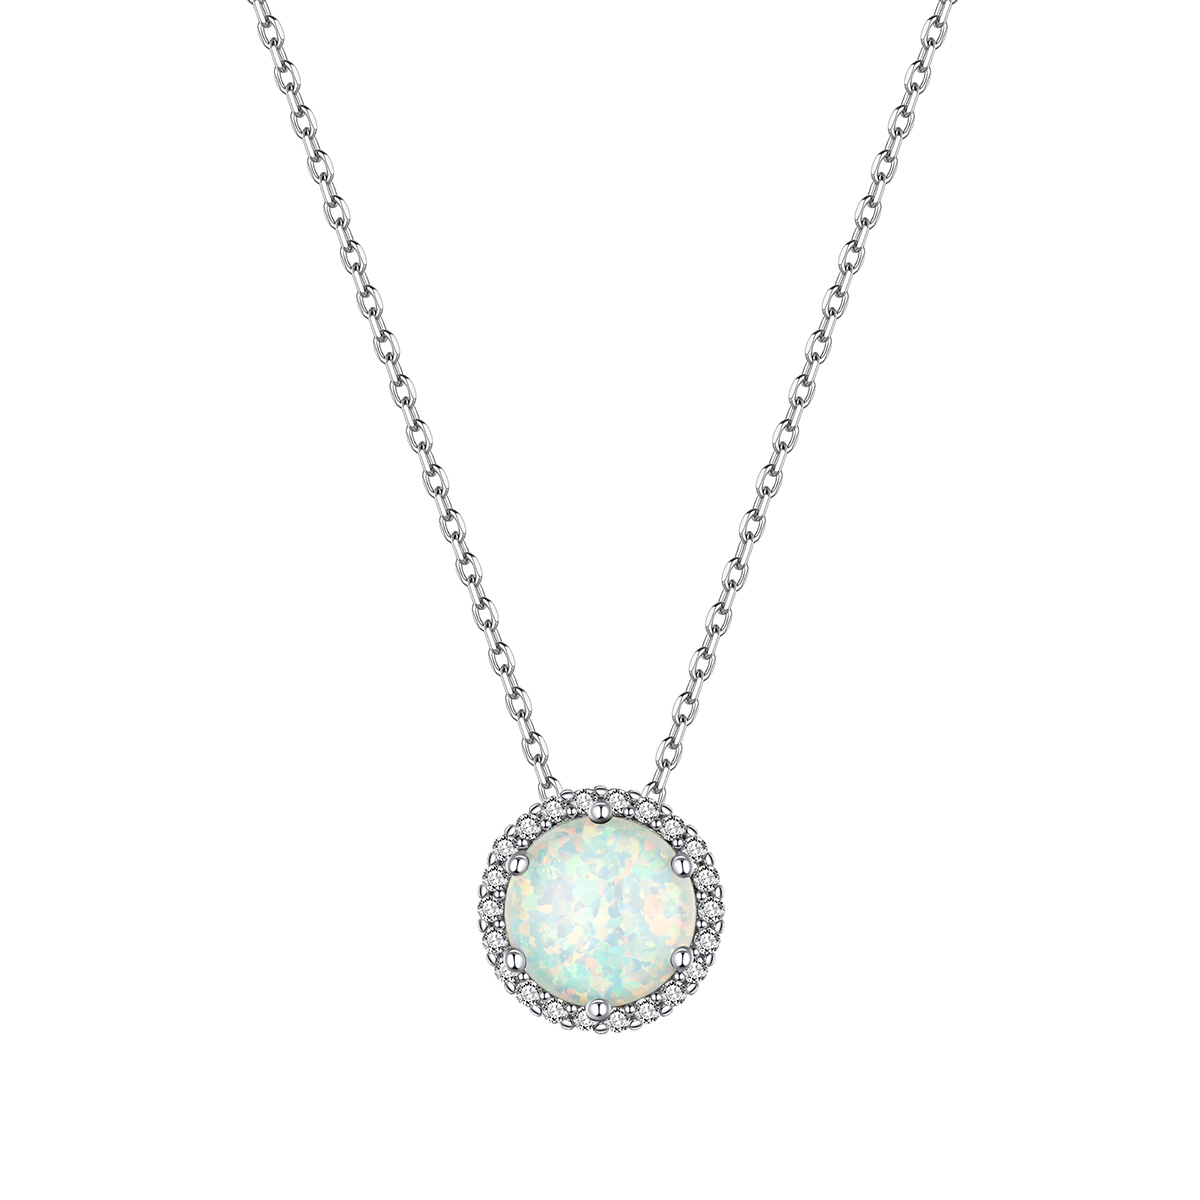 ChicSilver Sterling Silver Halo Opal Necklace For Women